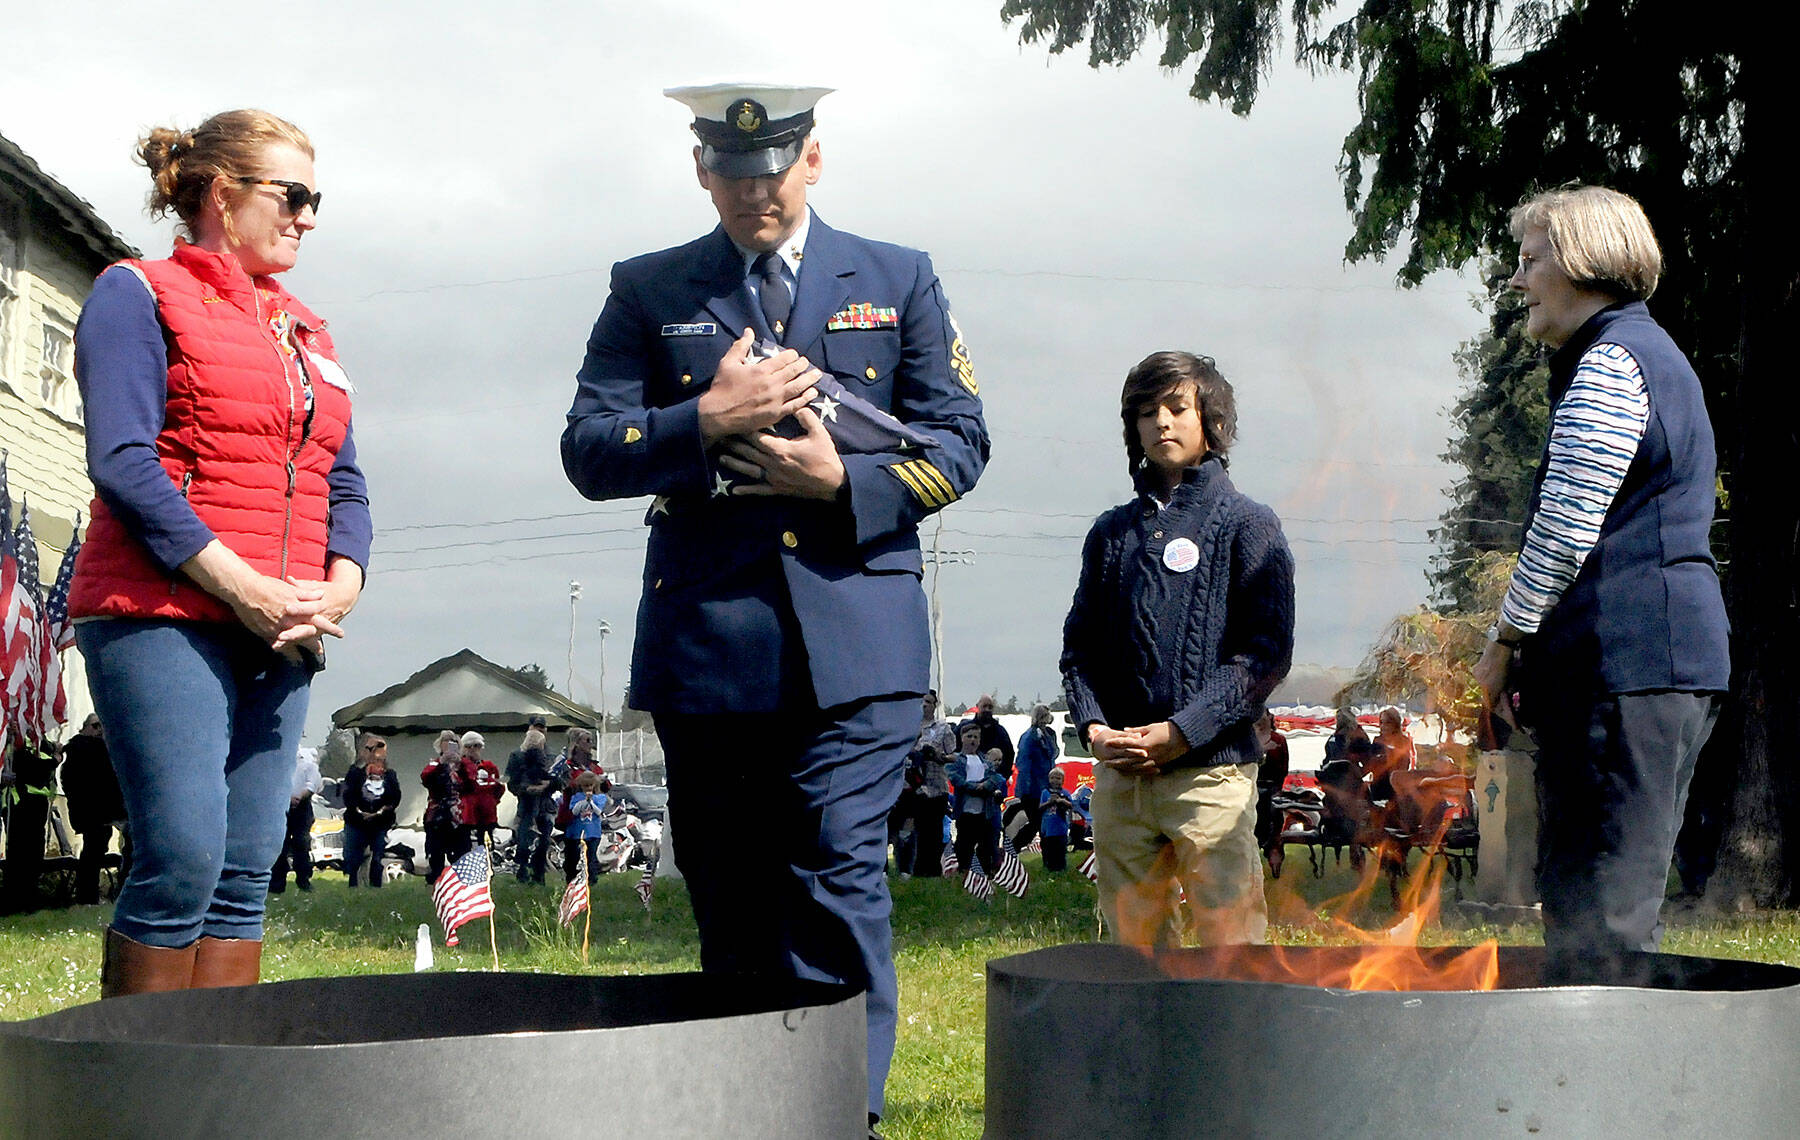 U.S. Coast Guard Chief Petty Officer Shane Thompson, accompanied by his son, Malachi Thompson, 10, a member of Junior American Citizens, carries a retiring flag for incineration on Tuesday at the Northwest Veterans Service Center in Port Angeles on Flag Day. (Keith Thorpe/Peninsula Daily News)